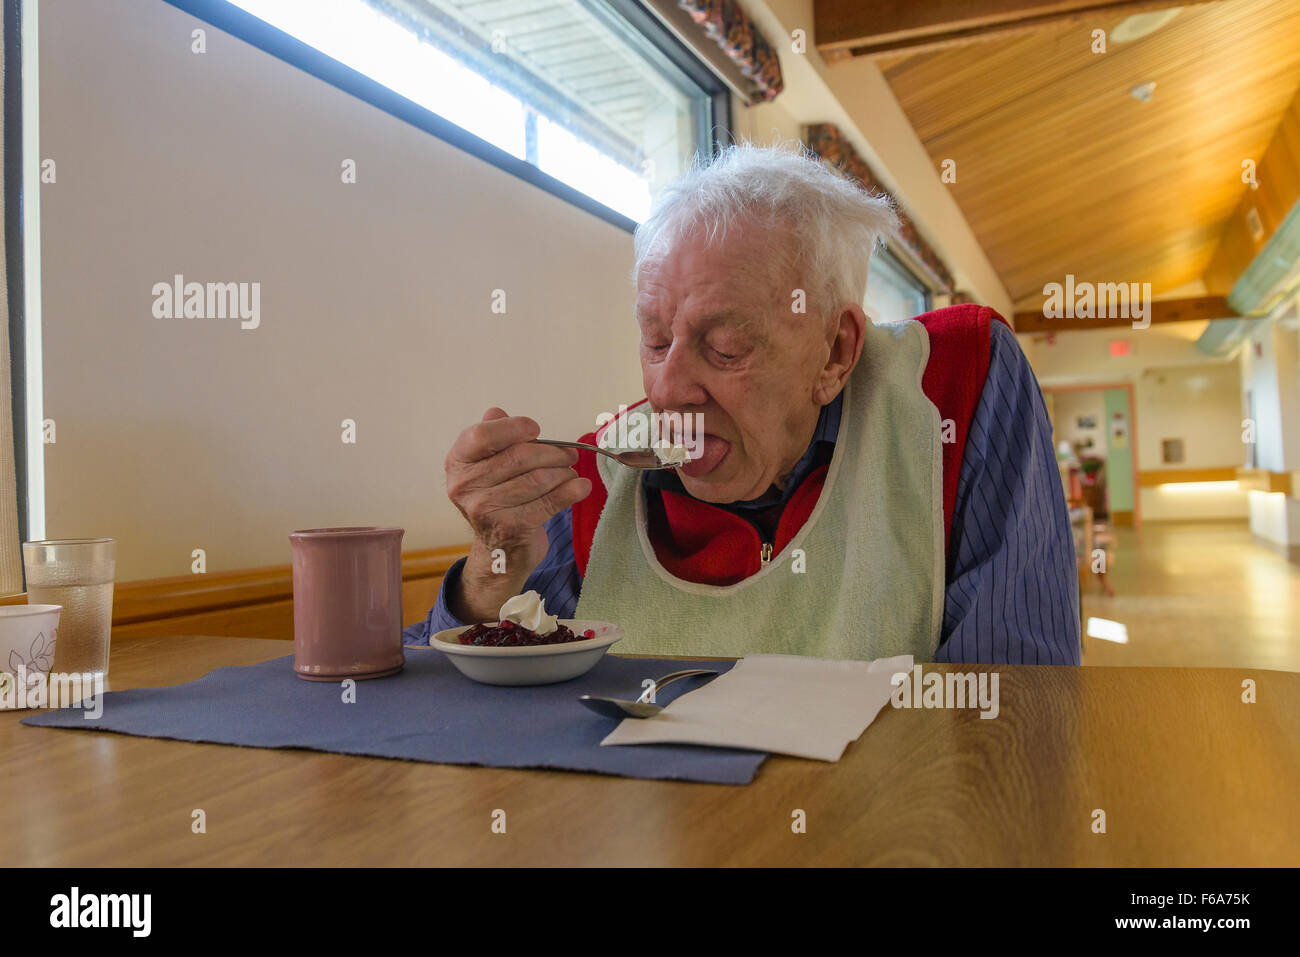 Man in Dementia Care Home eating lunch. Stock Photo